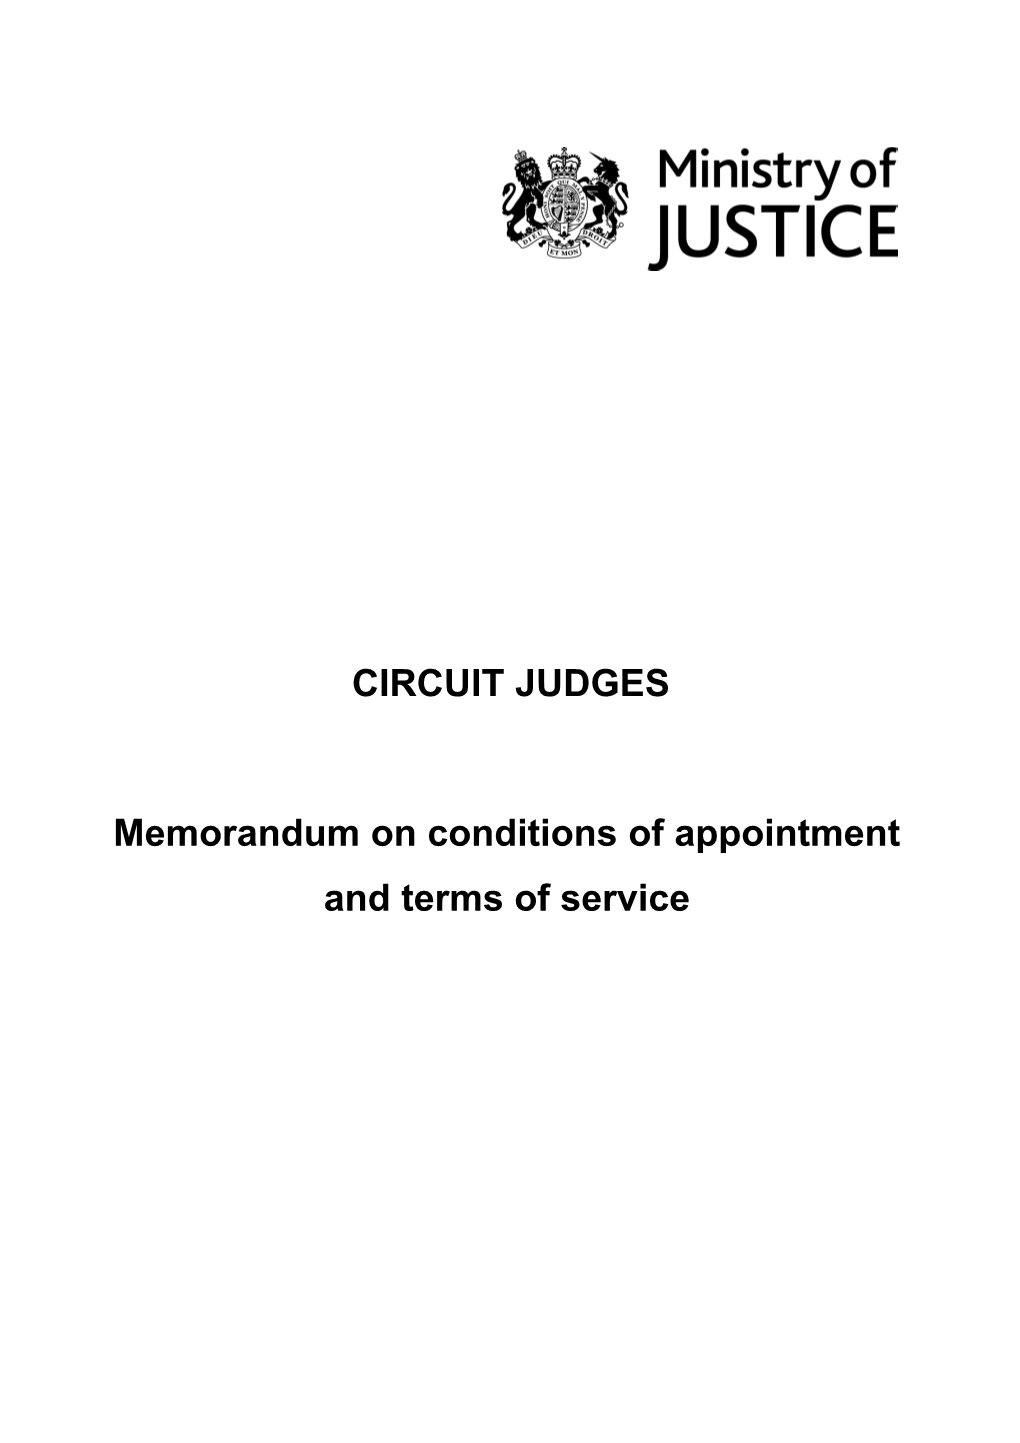 Memorandum on Conditions of Appointment